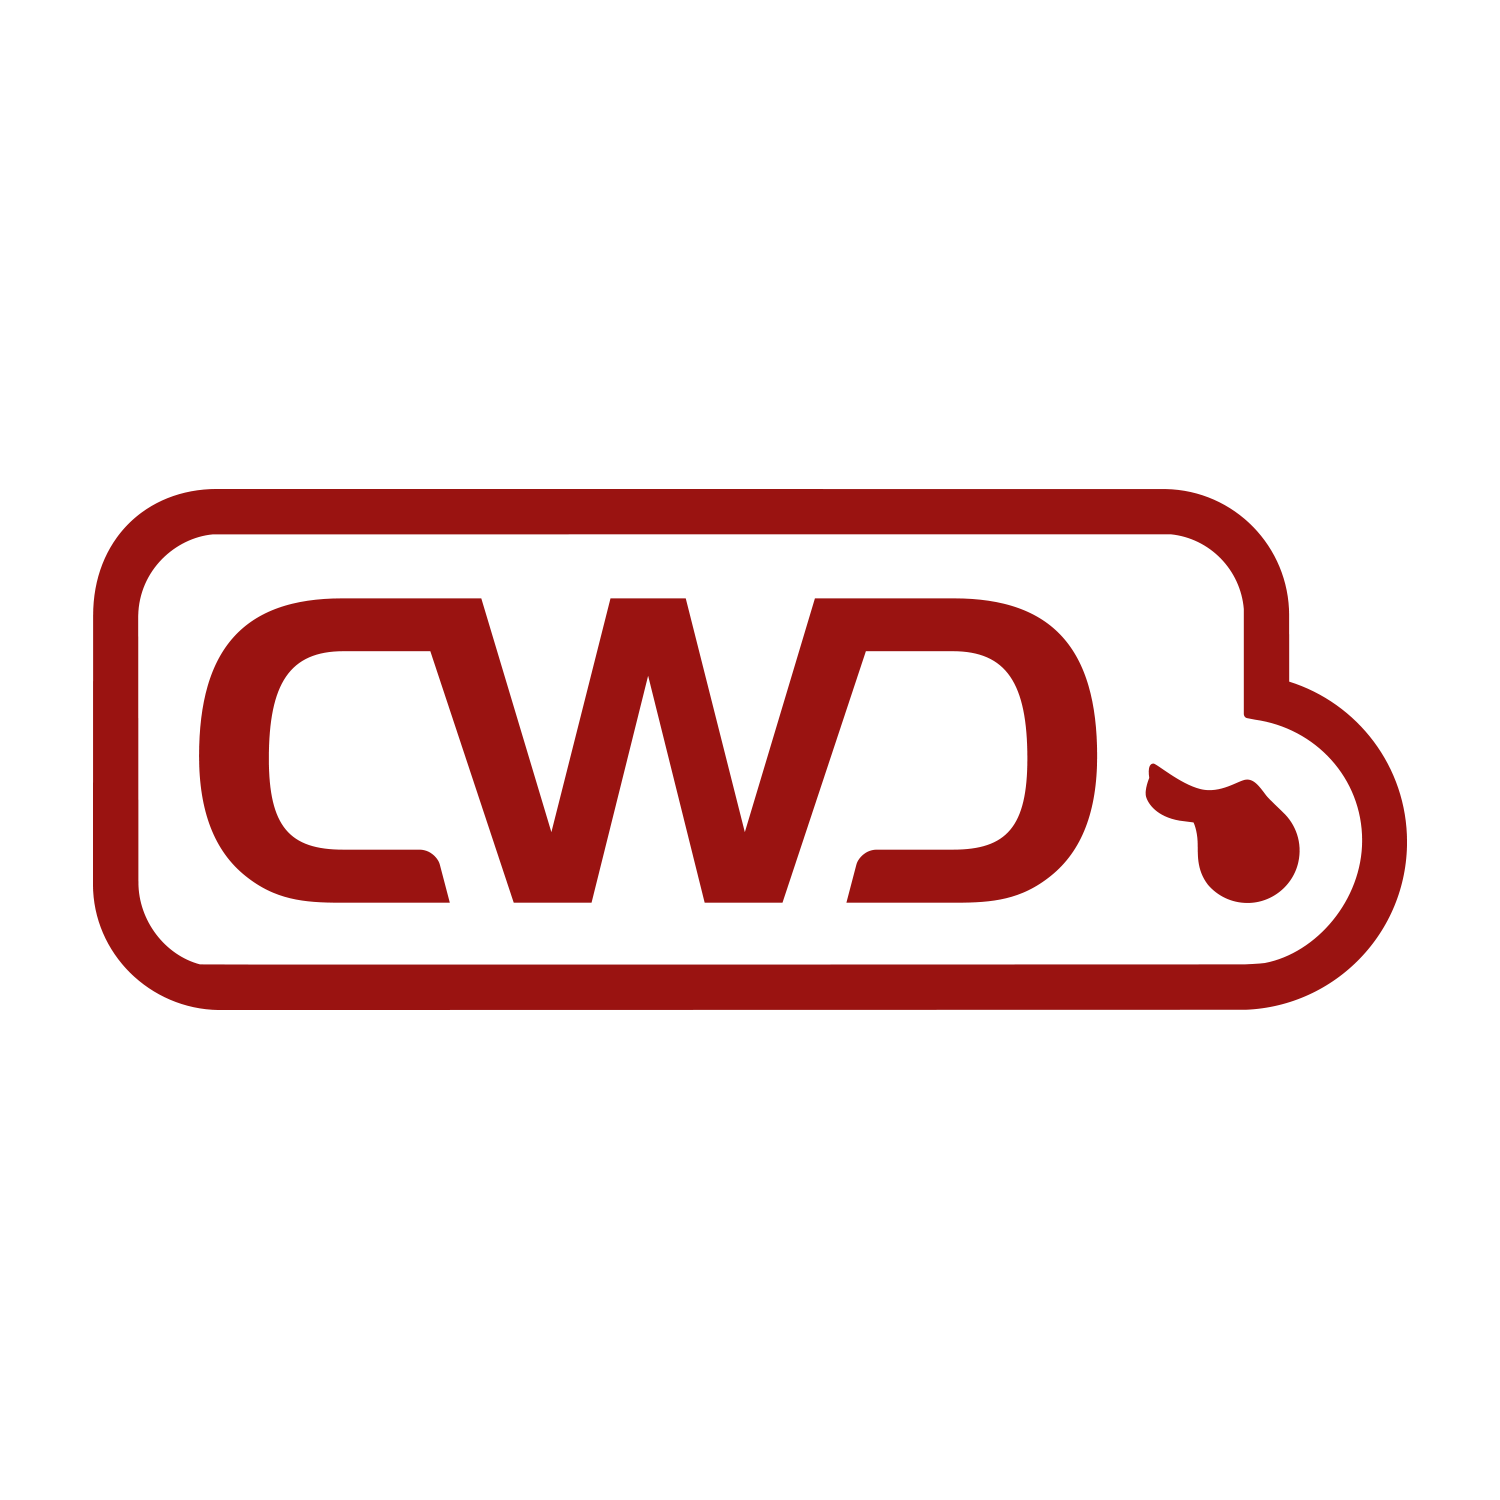 CWD Sellier logo for Maryland Saddlery Consignment collection of used CWD saddles, bridles, breastplates, girths, and more.